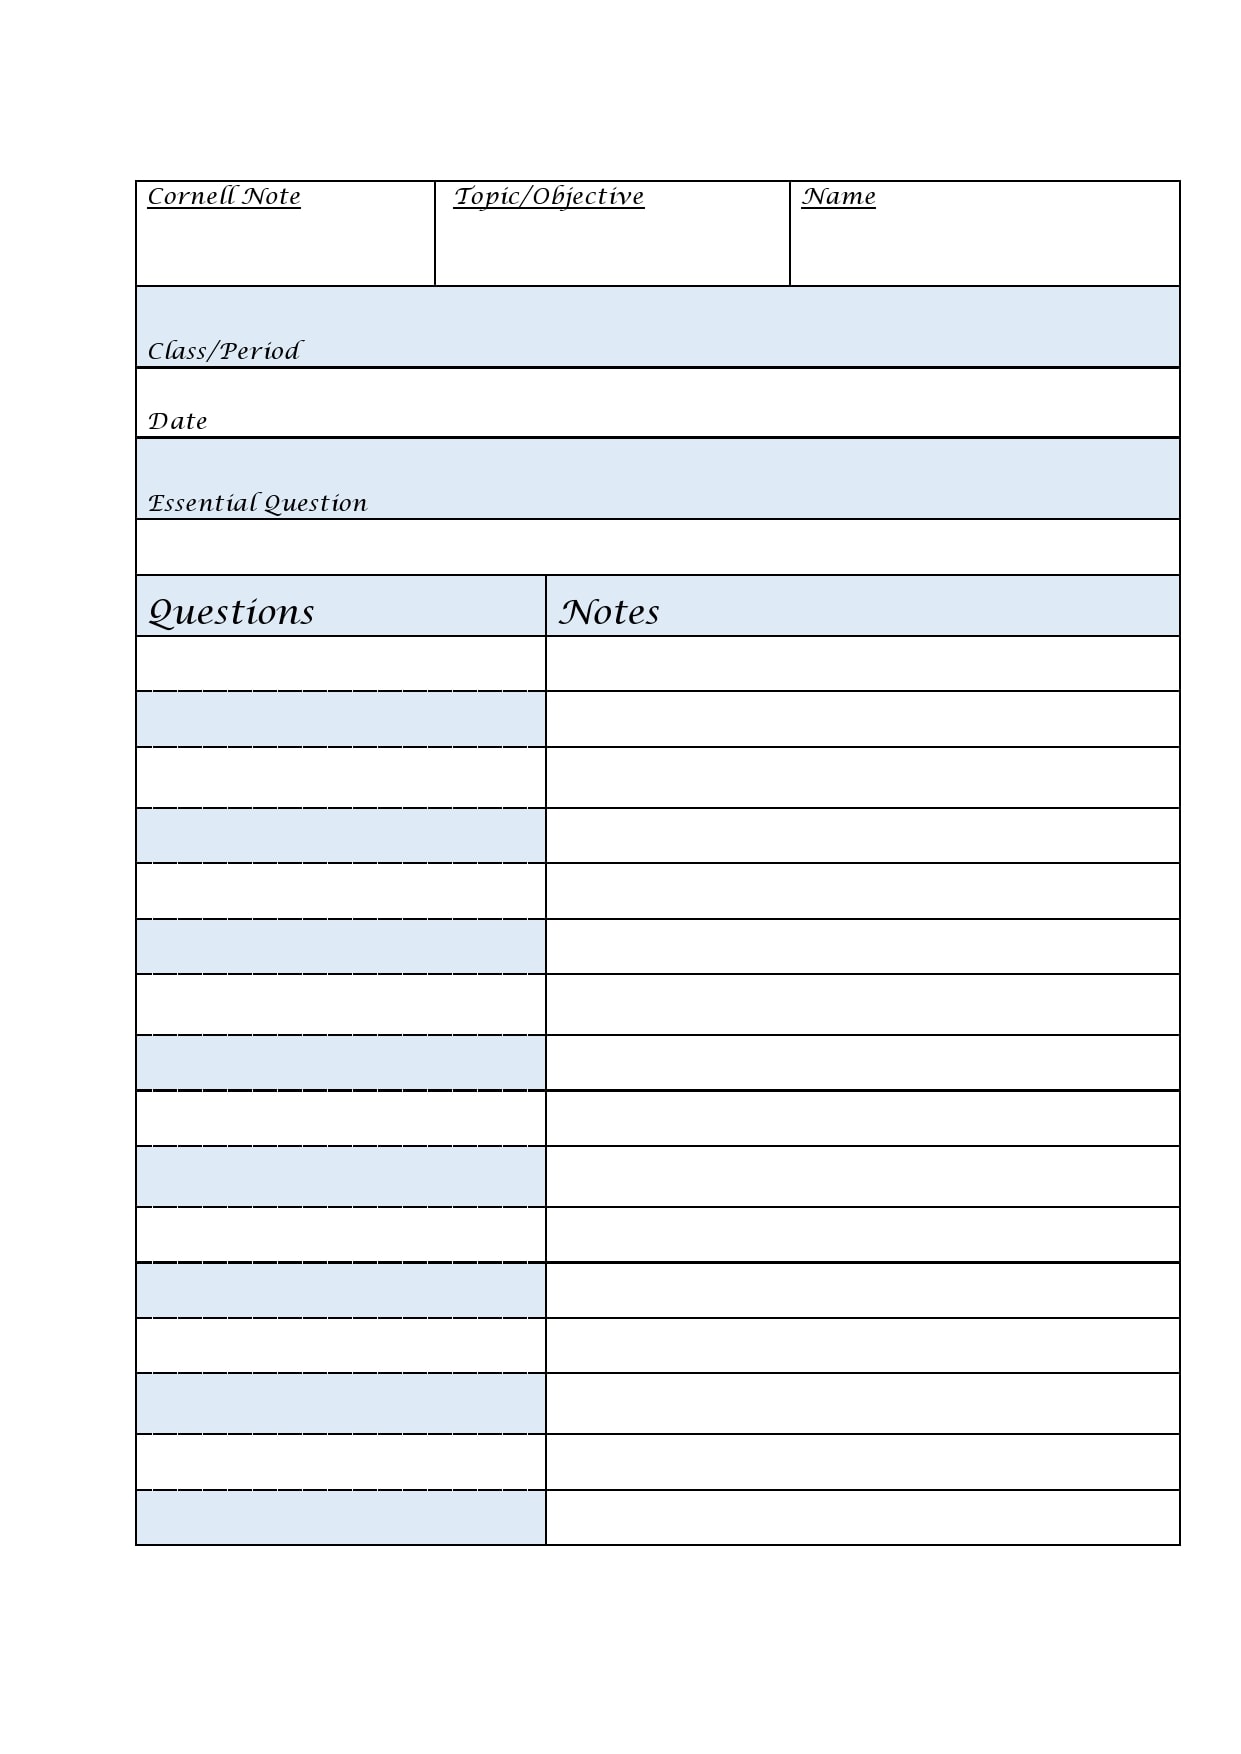 21 Printable Cornell Notes Templates [Free] - TemplateArchive With Regard To Note Taking Template Pdf